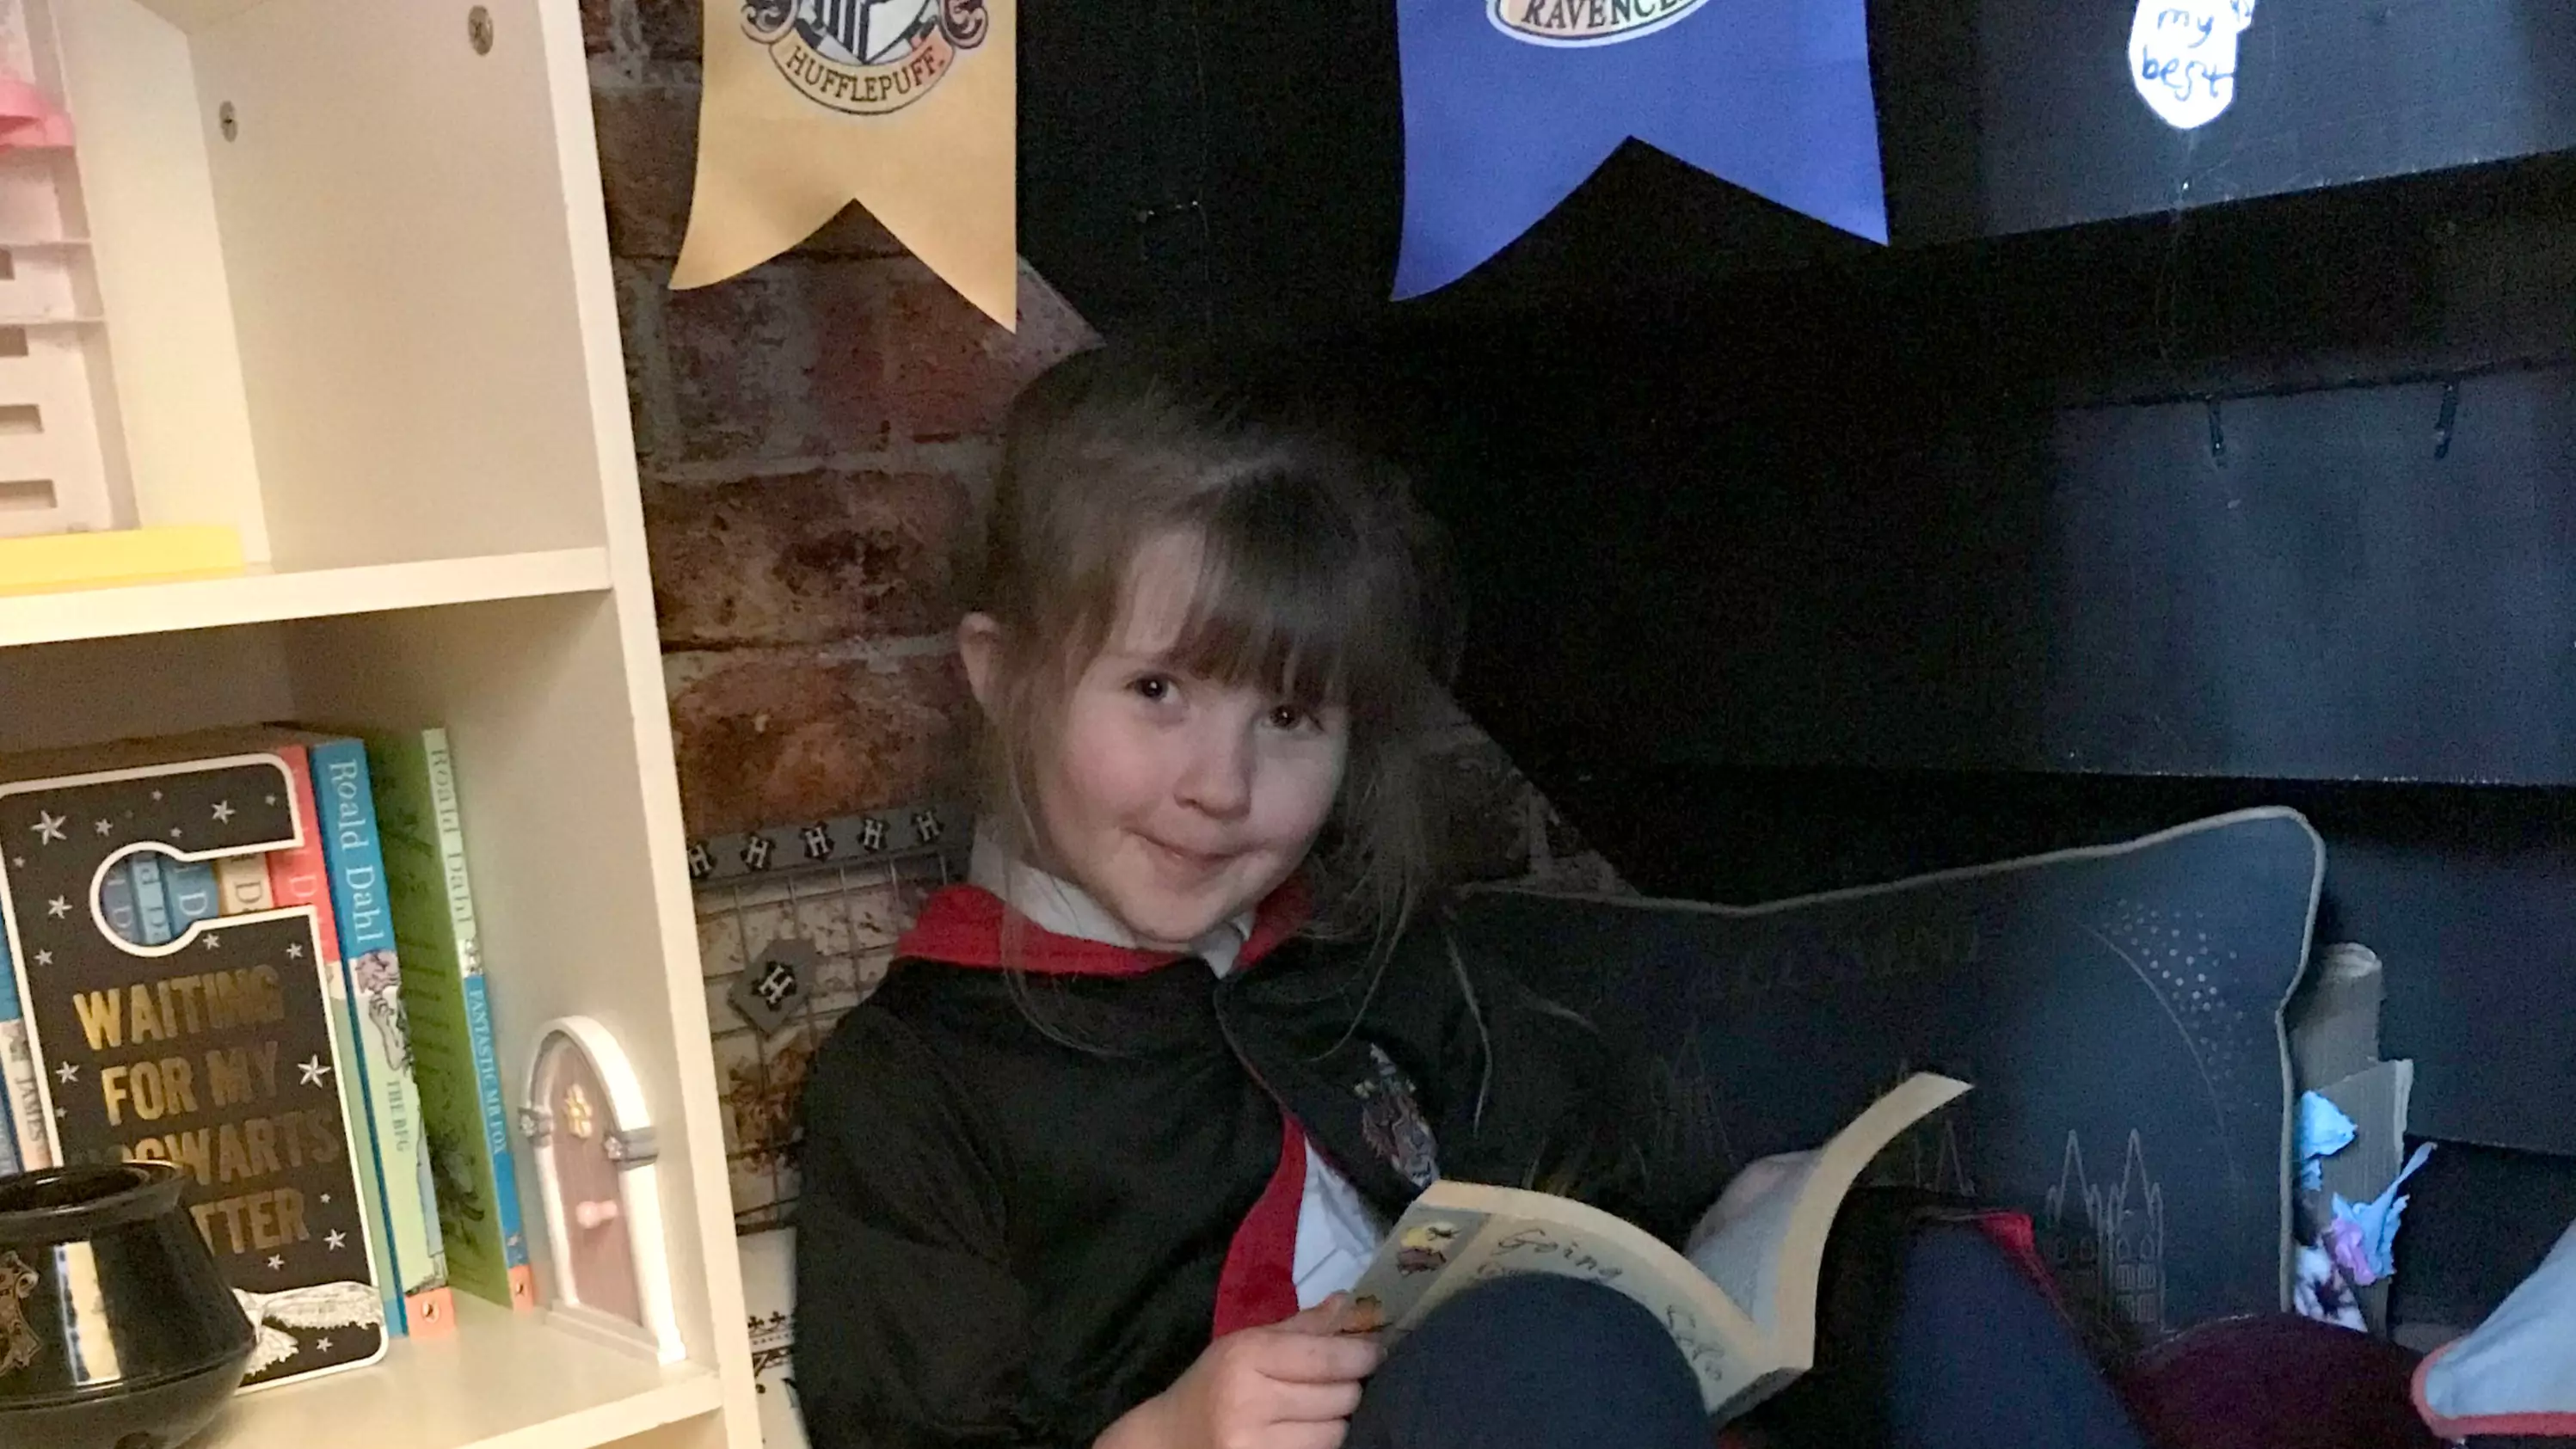 Woman Creates 'Cupboard Under The Stairs' For Her 'Harry Potter' Obsessed Daughter